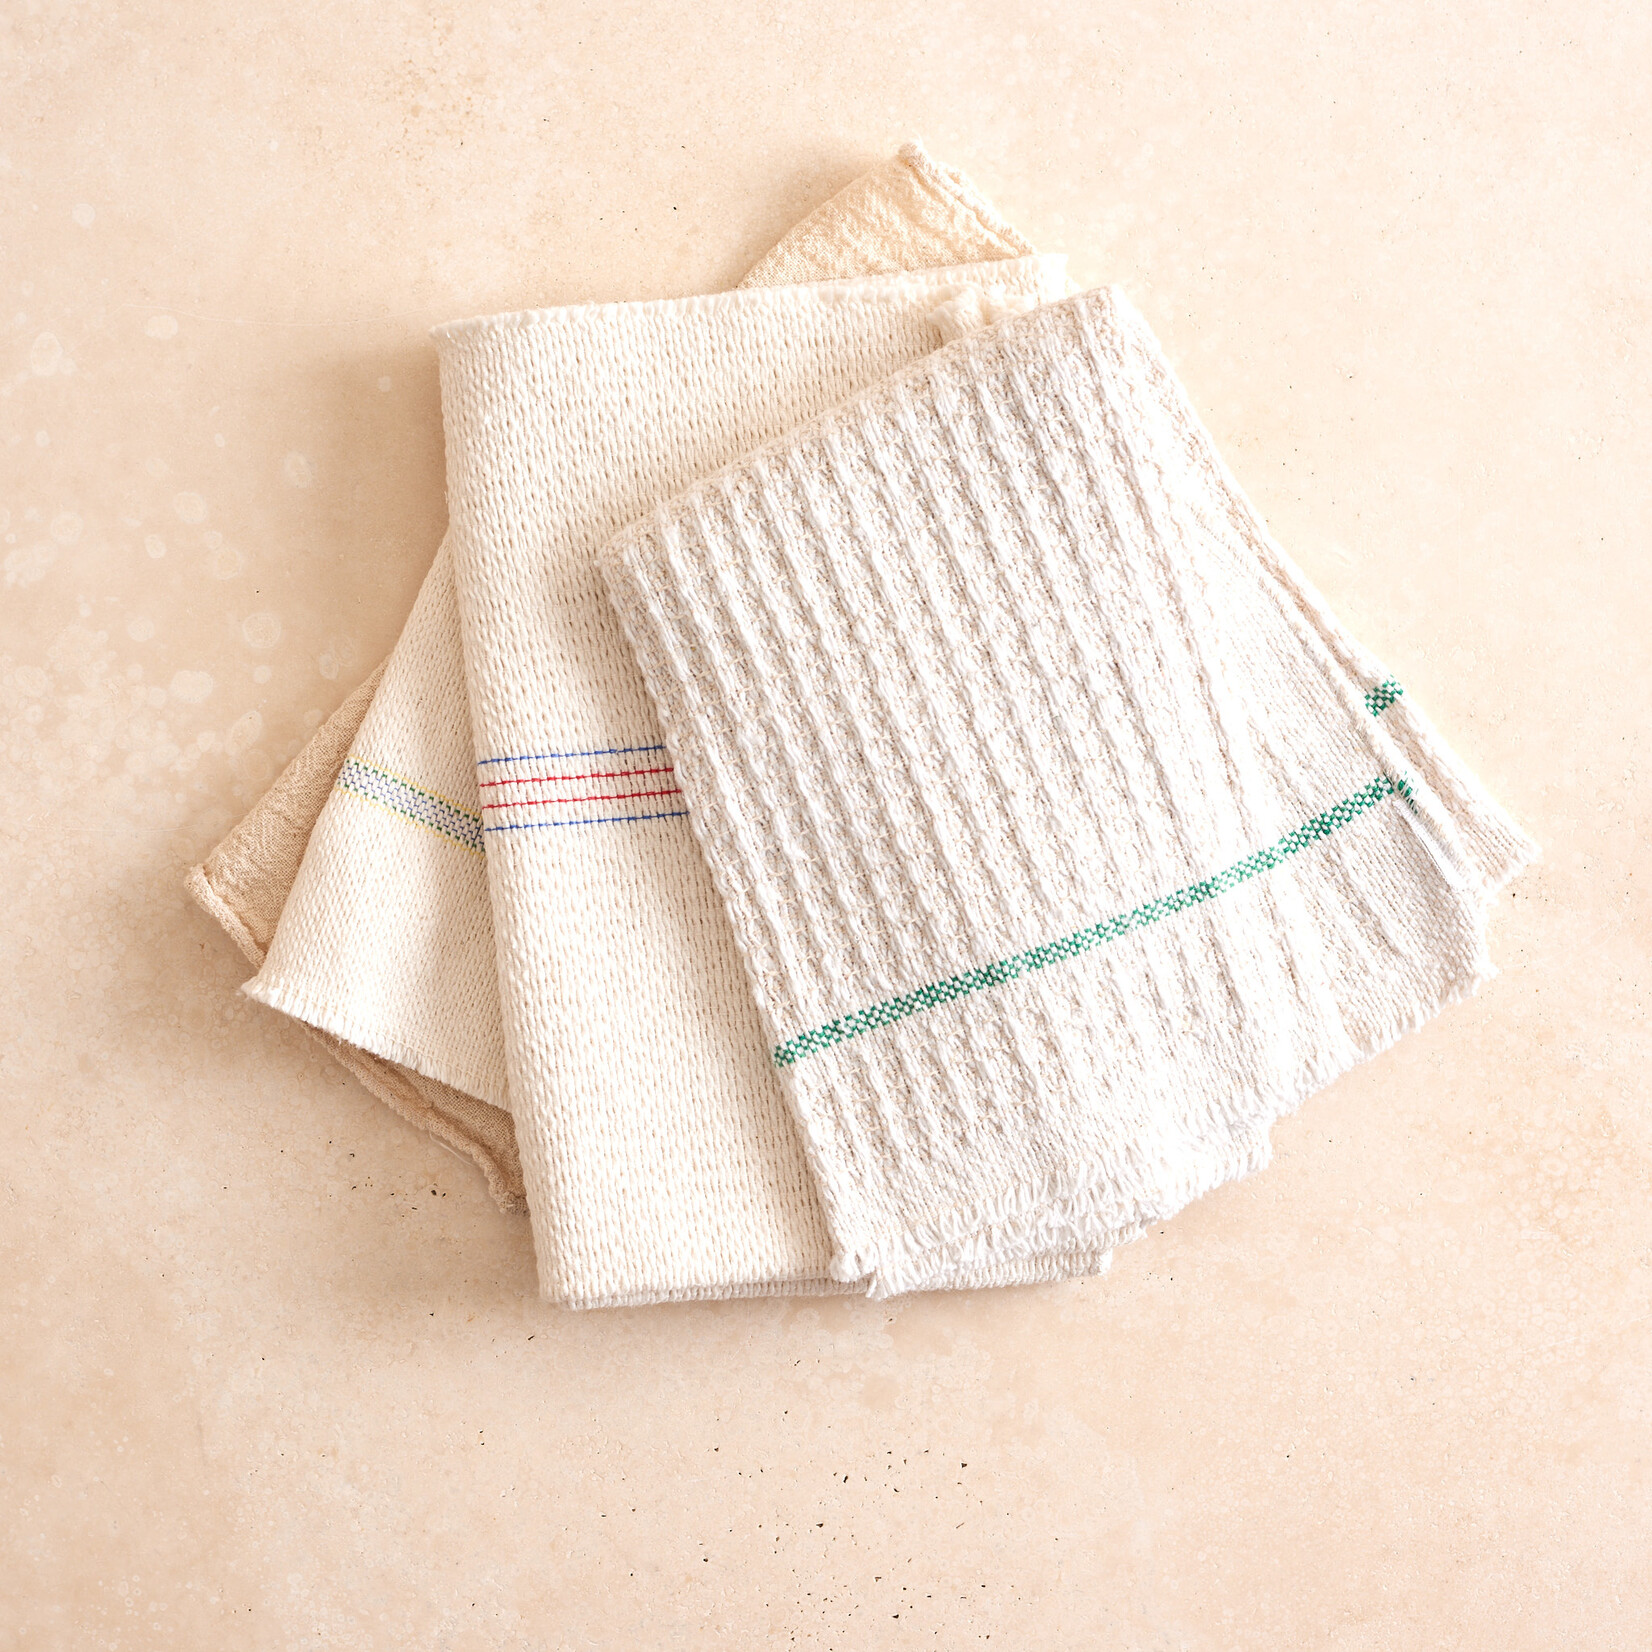 Cotton Cleaning Cloth with green stripe